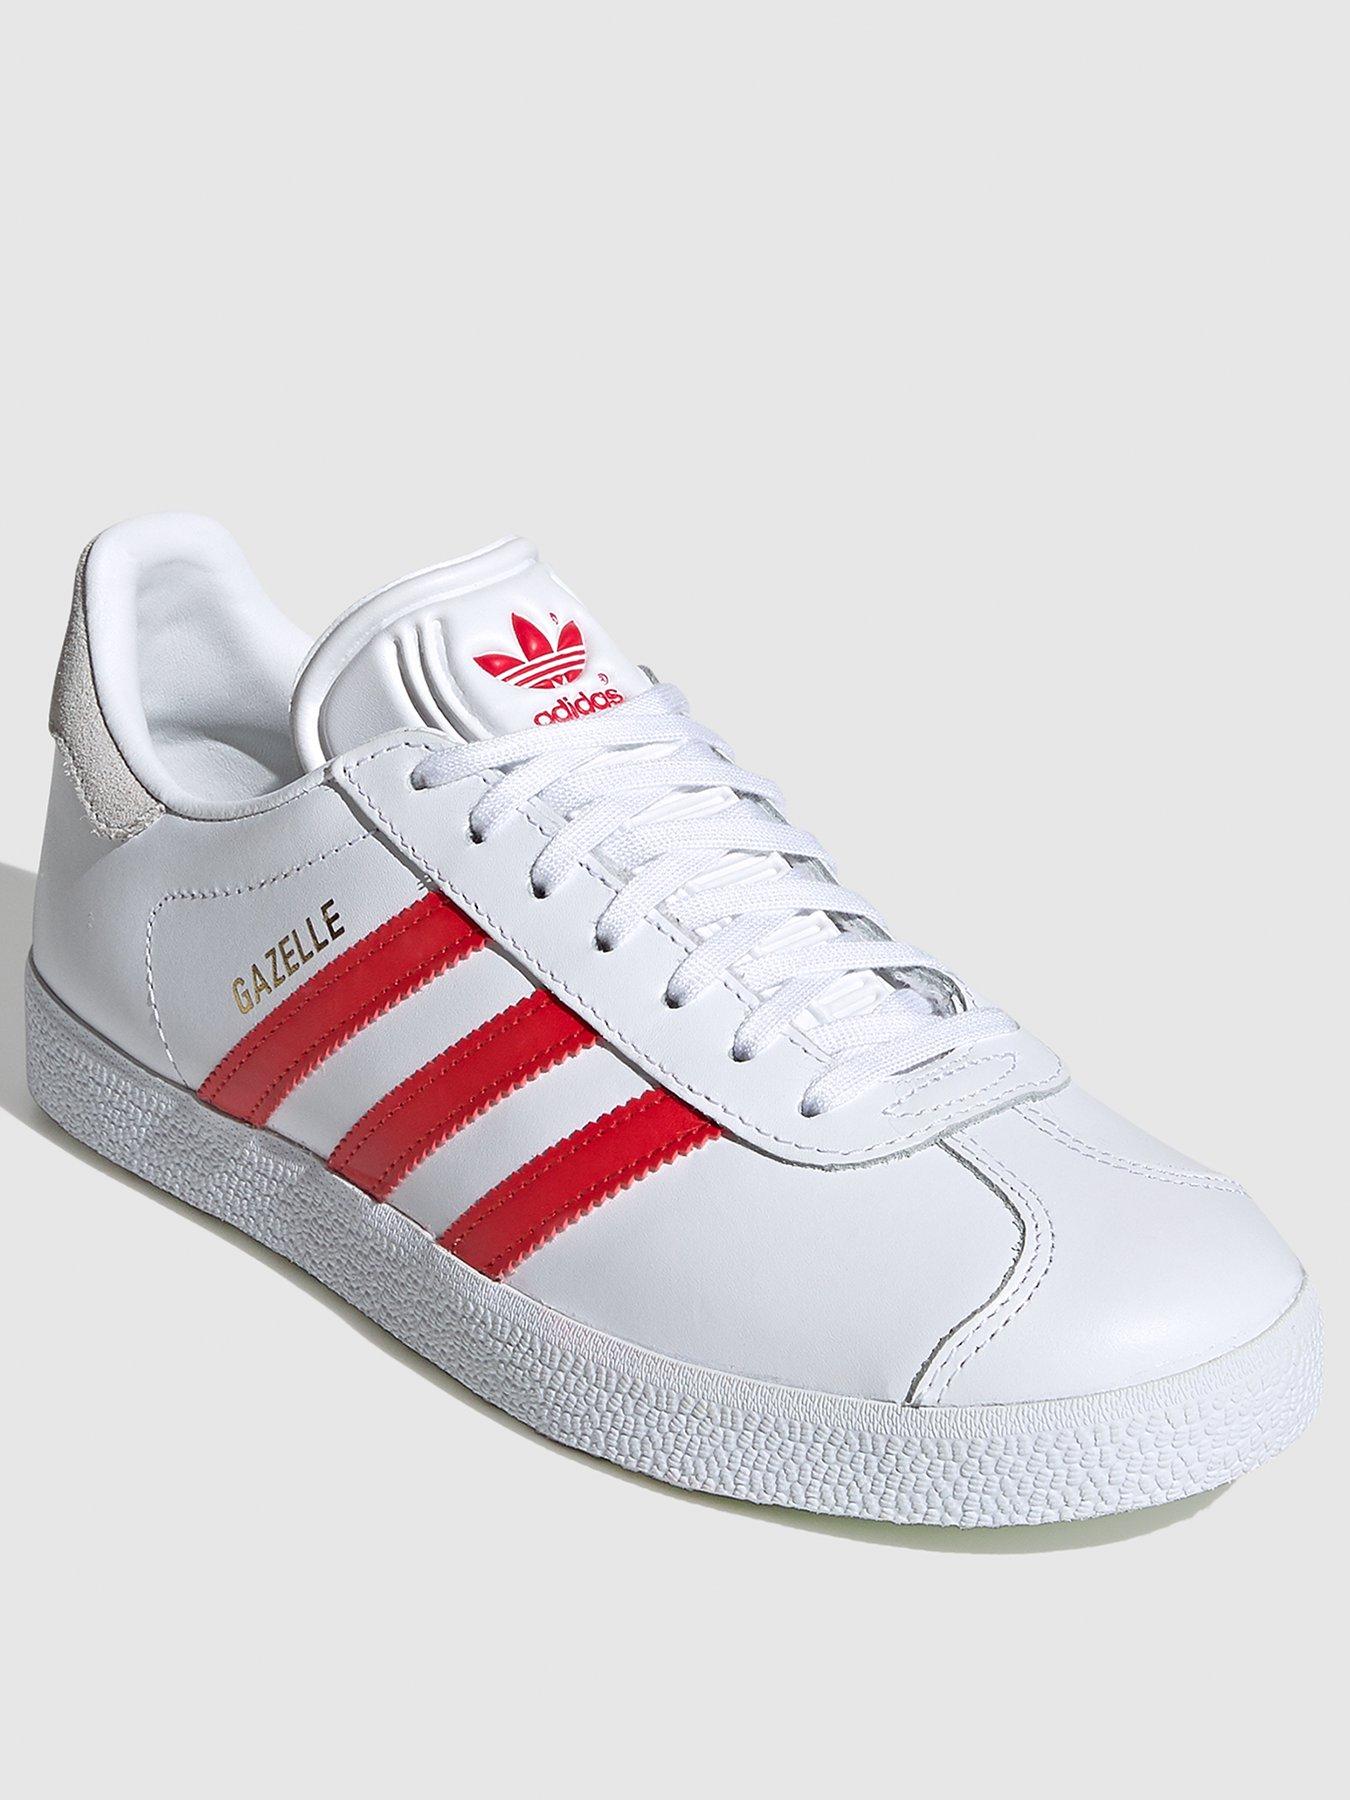 red and white adidas gazelle